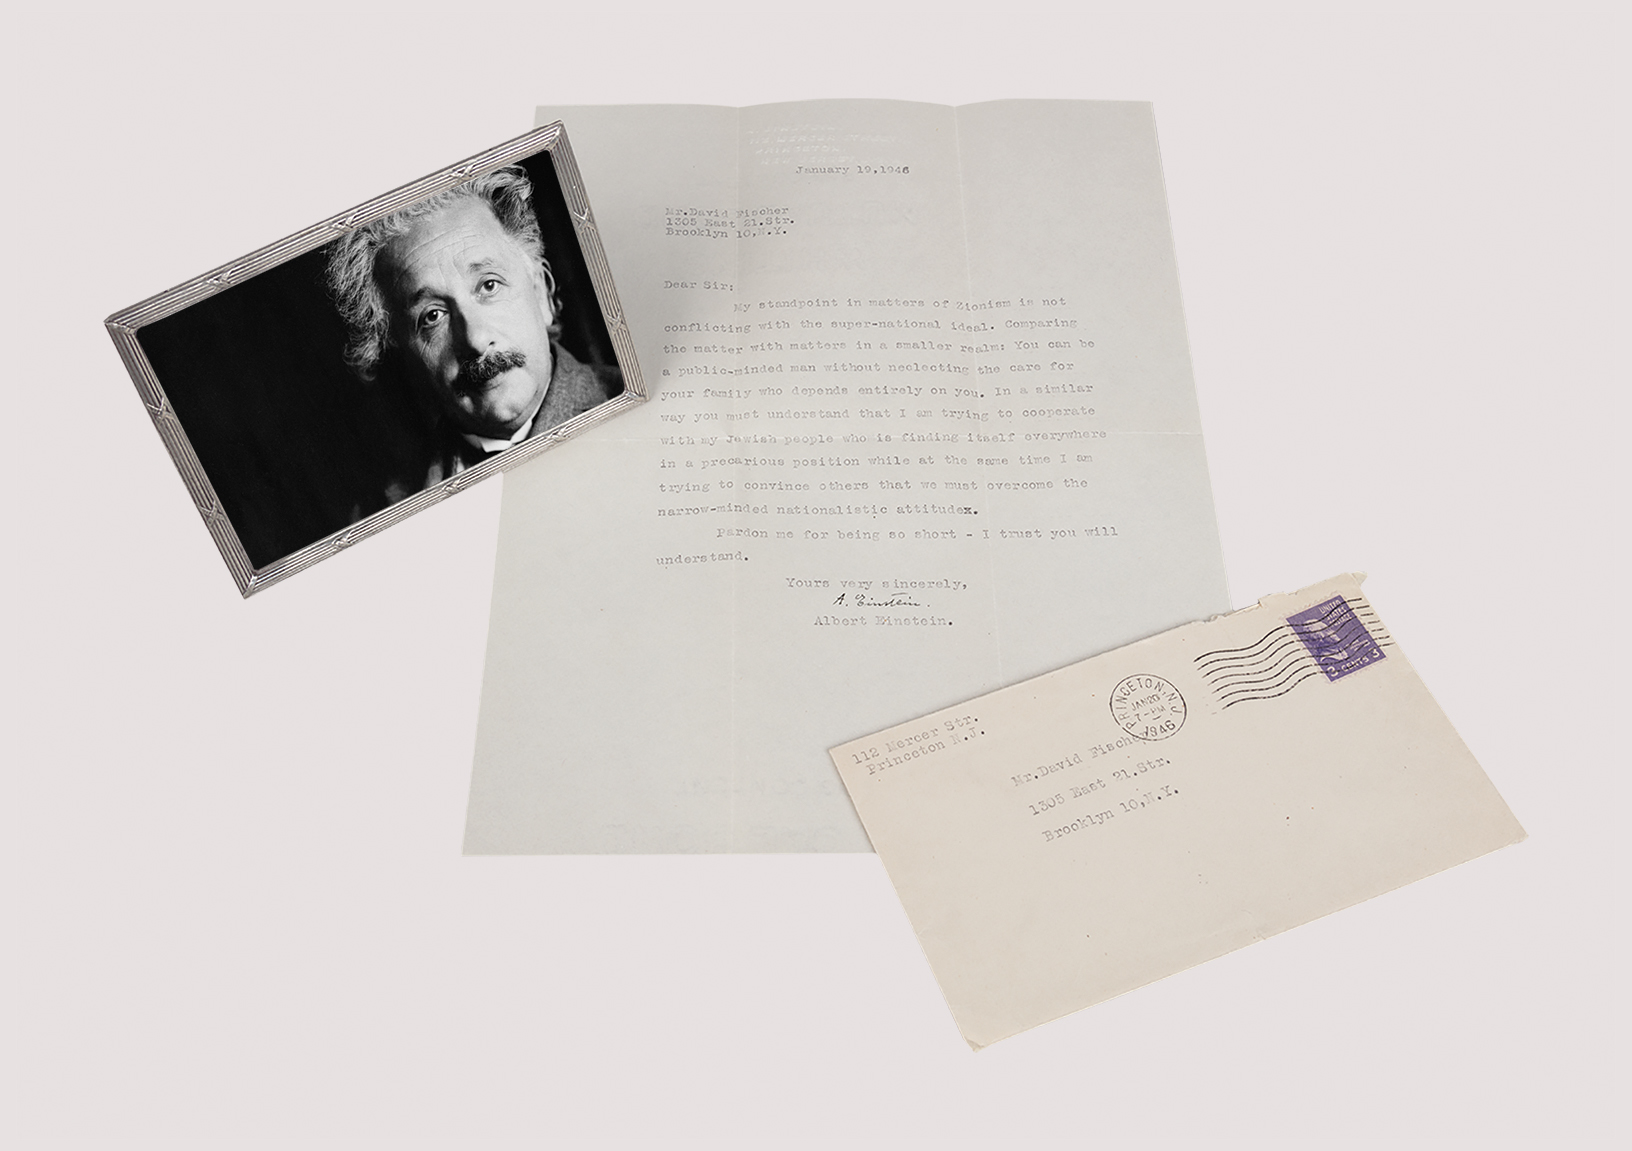 <p>Albert Einstein. Typed Letter Signed.</p>
<p>Containing his views on Zionism in relation to World Federalism.</p>
<p>Princeton, 19th January, 1946.</p>
<p>Sold at auction 14th June, 2018.</p>
<p>Hammer-price: $36,000.</p>